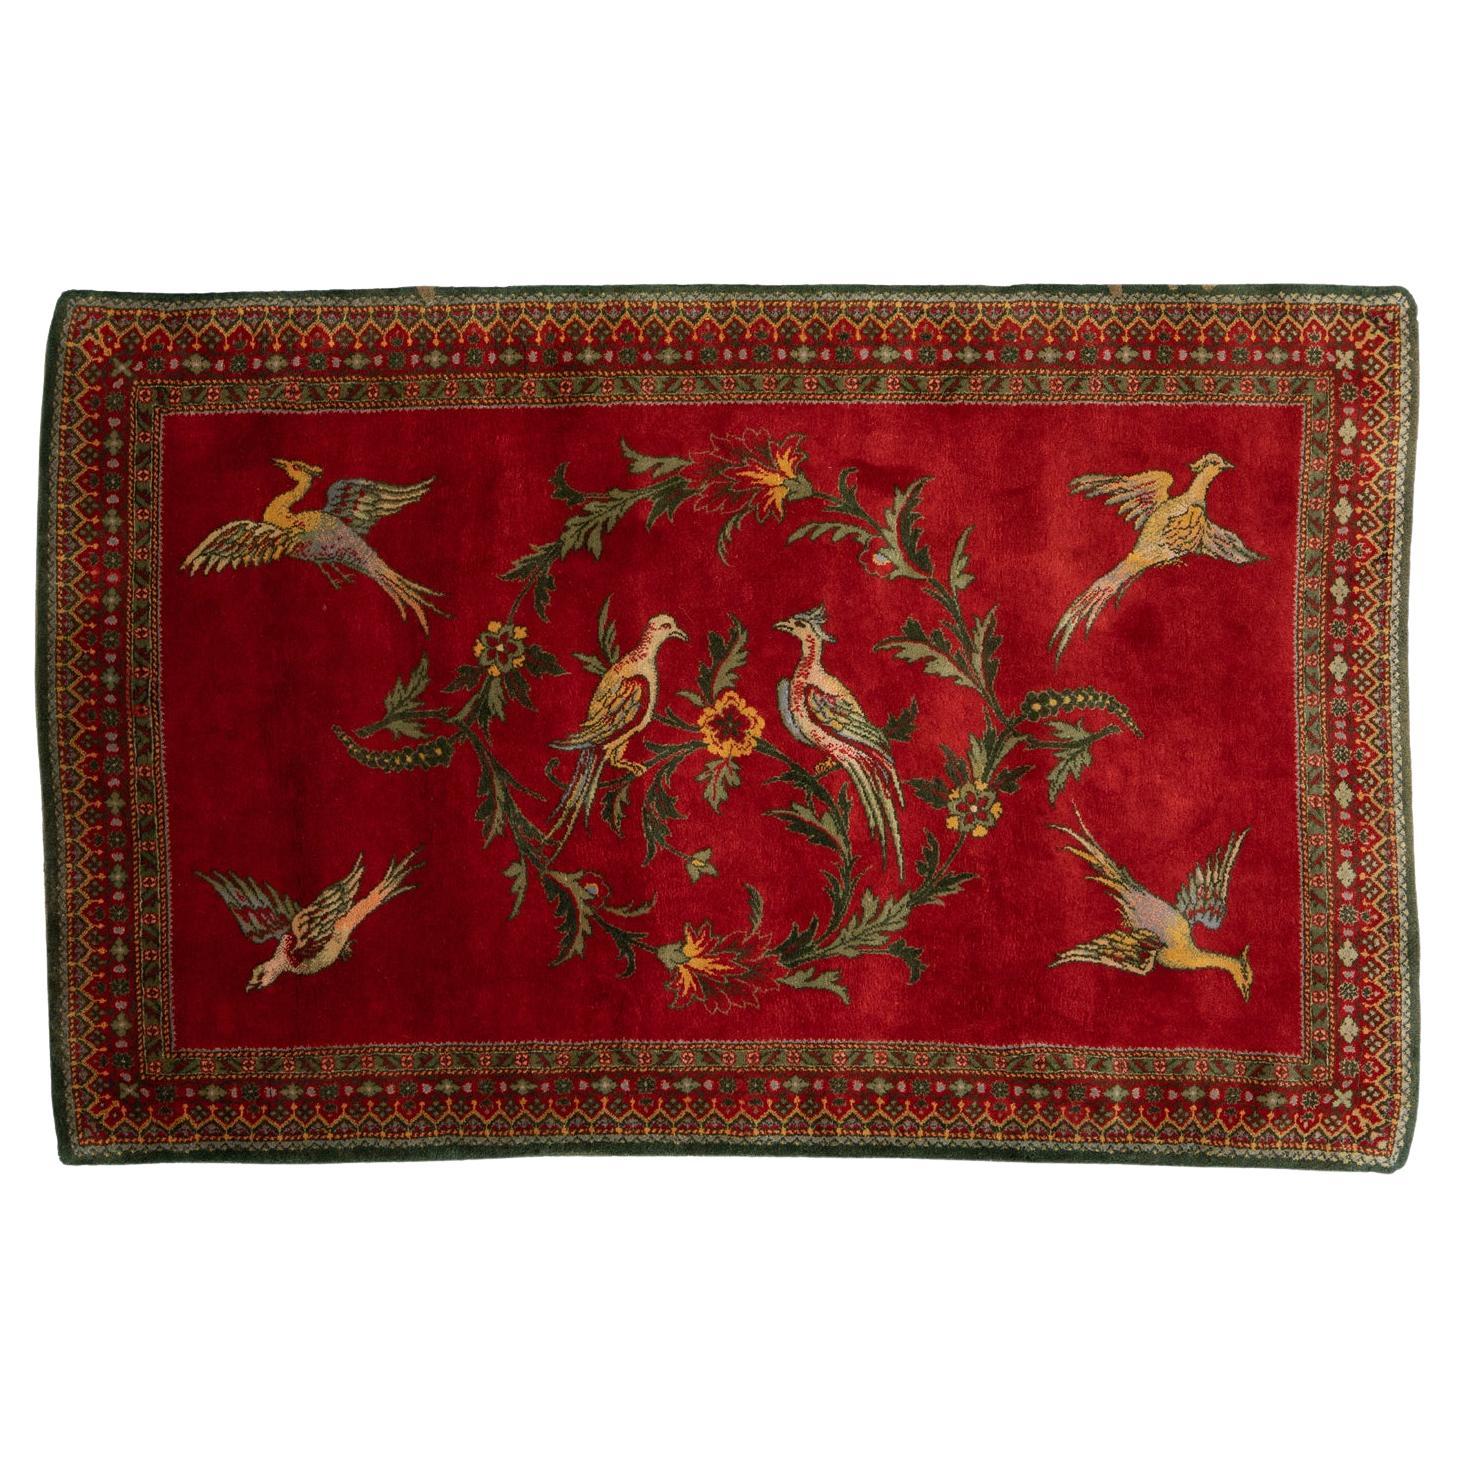 European Rug Cherry Field with Birds and Flower Rings, ca. 1880